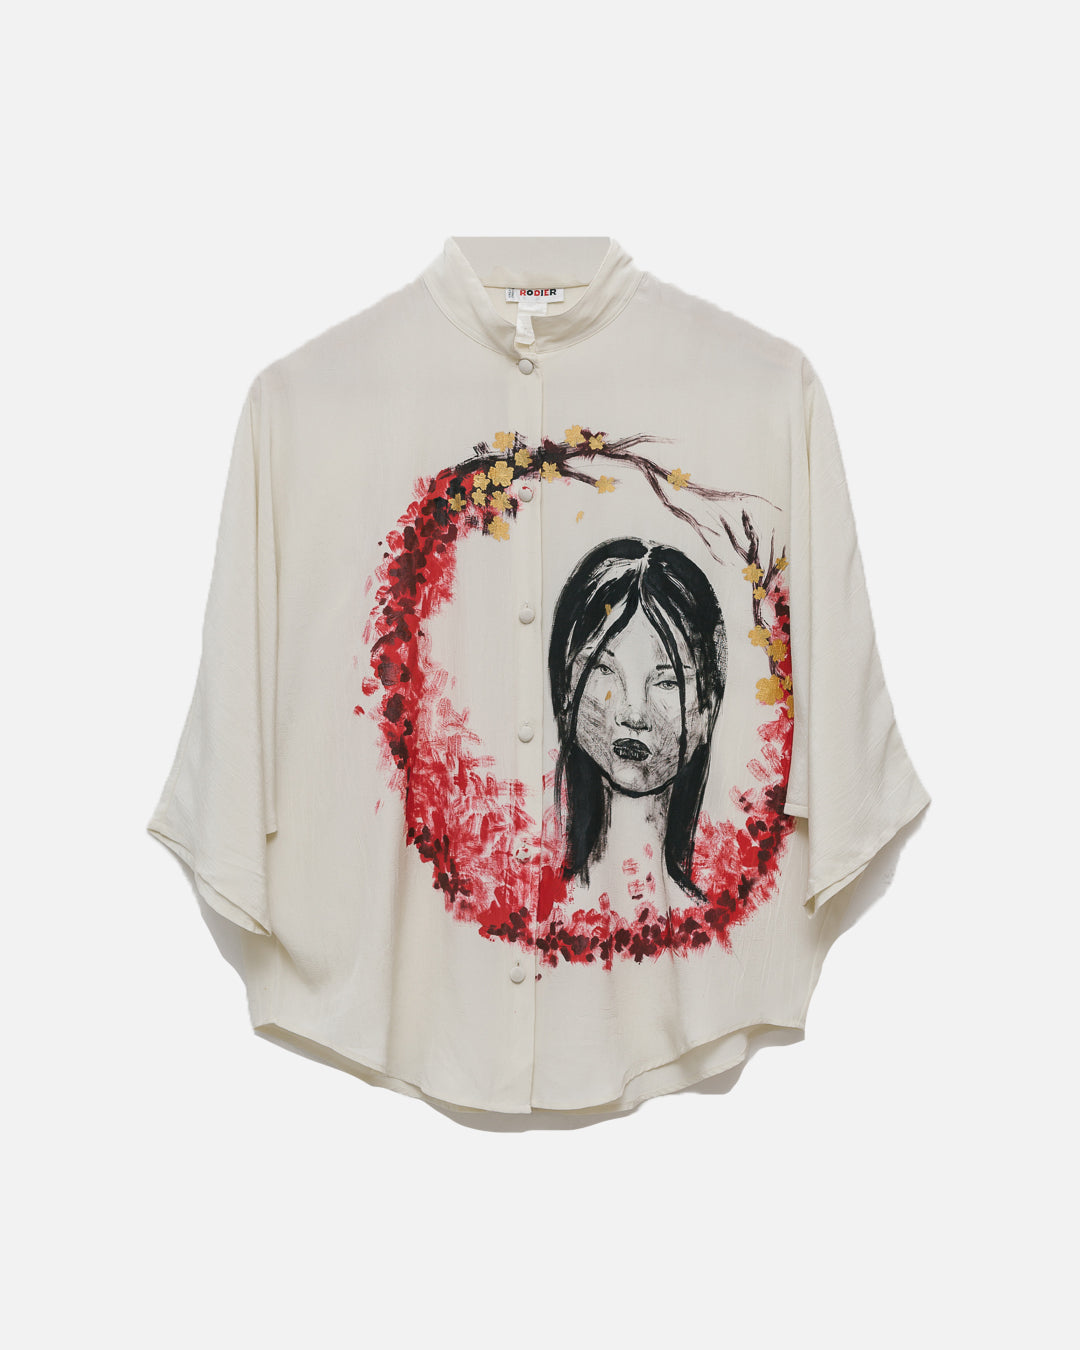 Handpainted ‘Spring is here’ Portrait Shirt